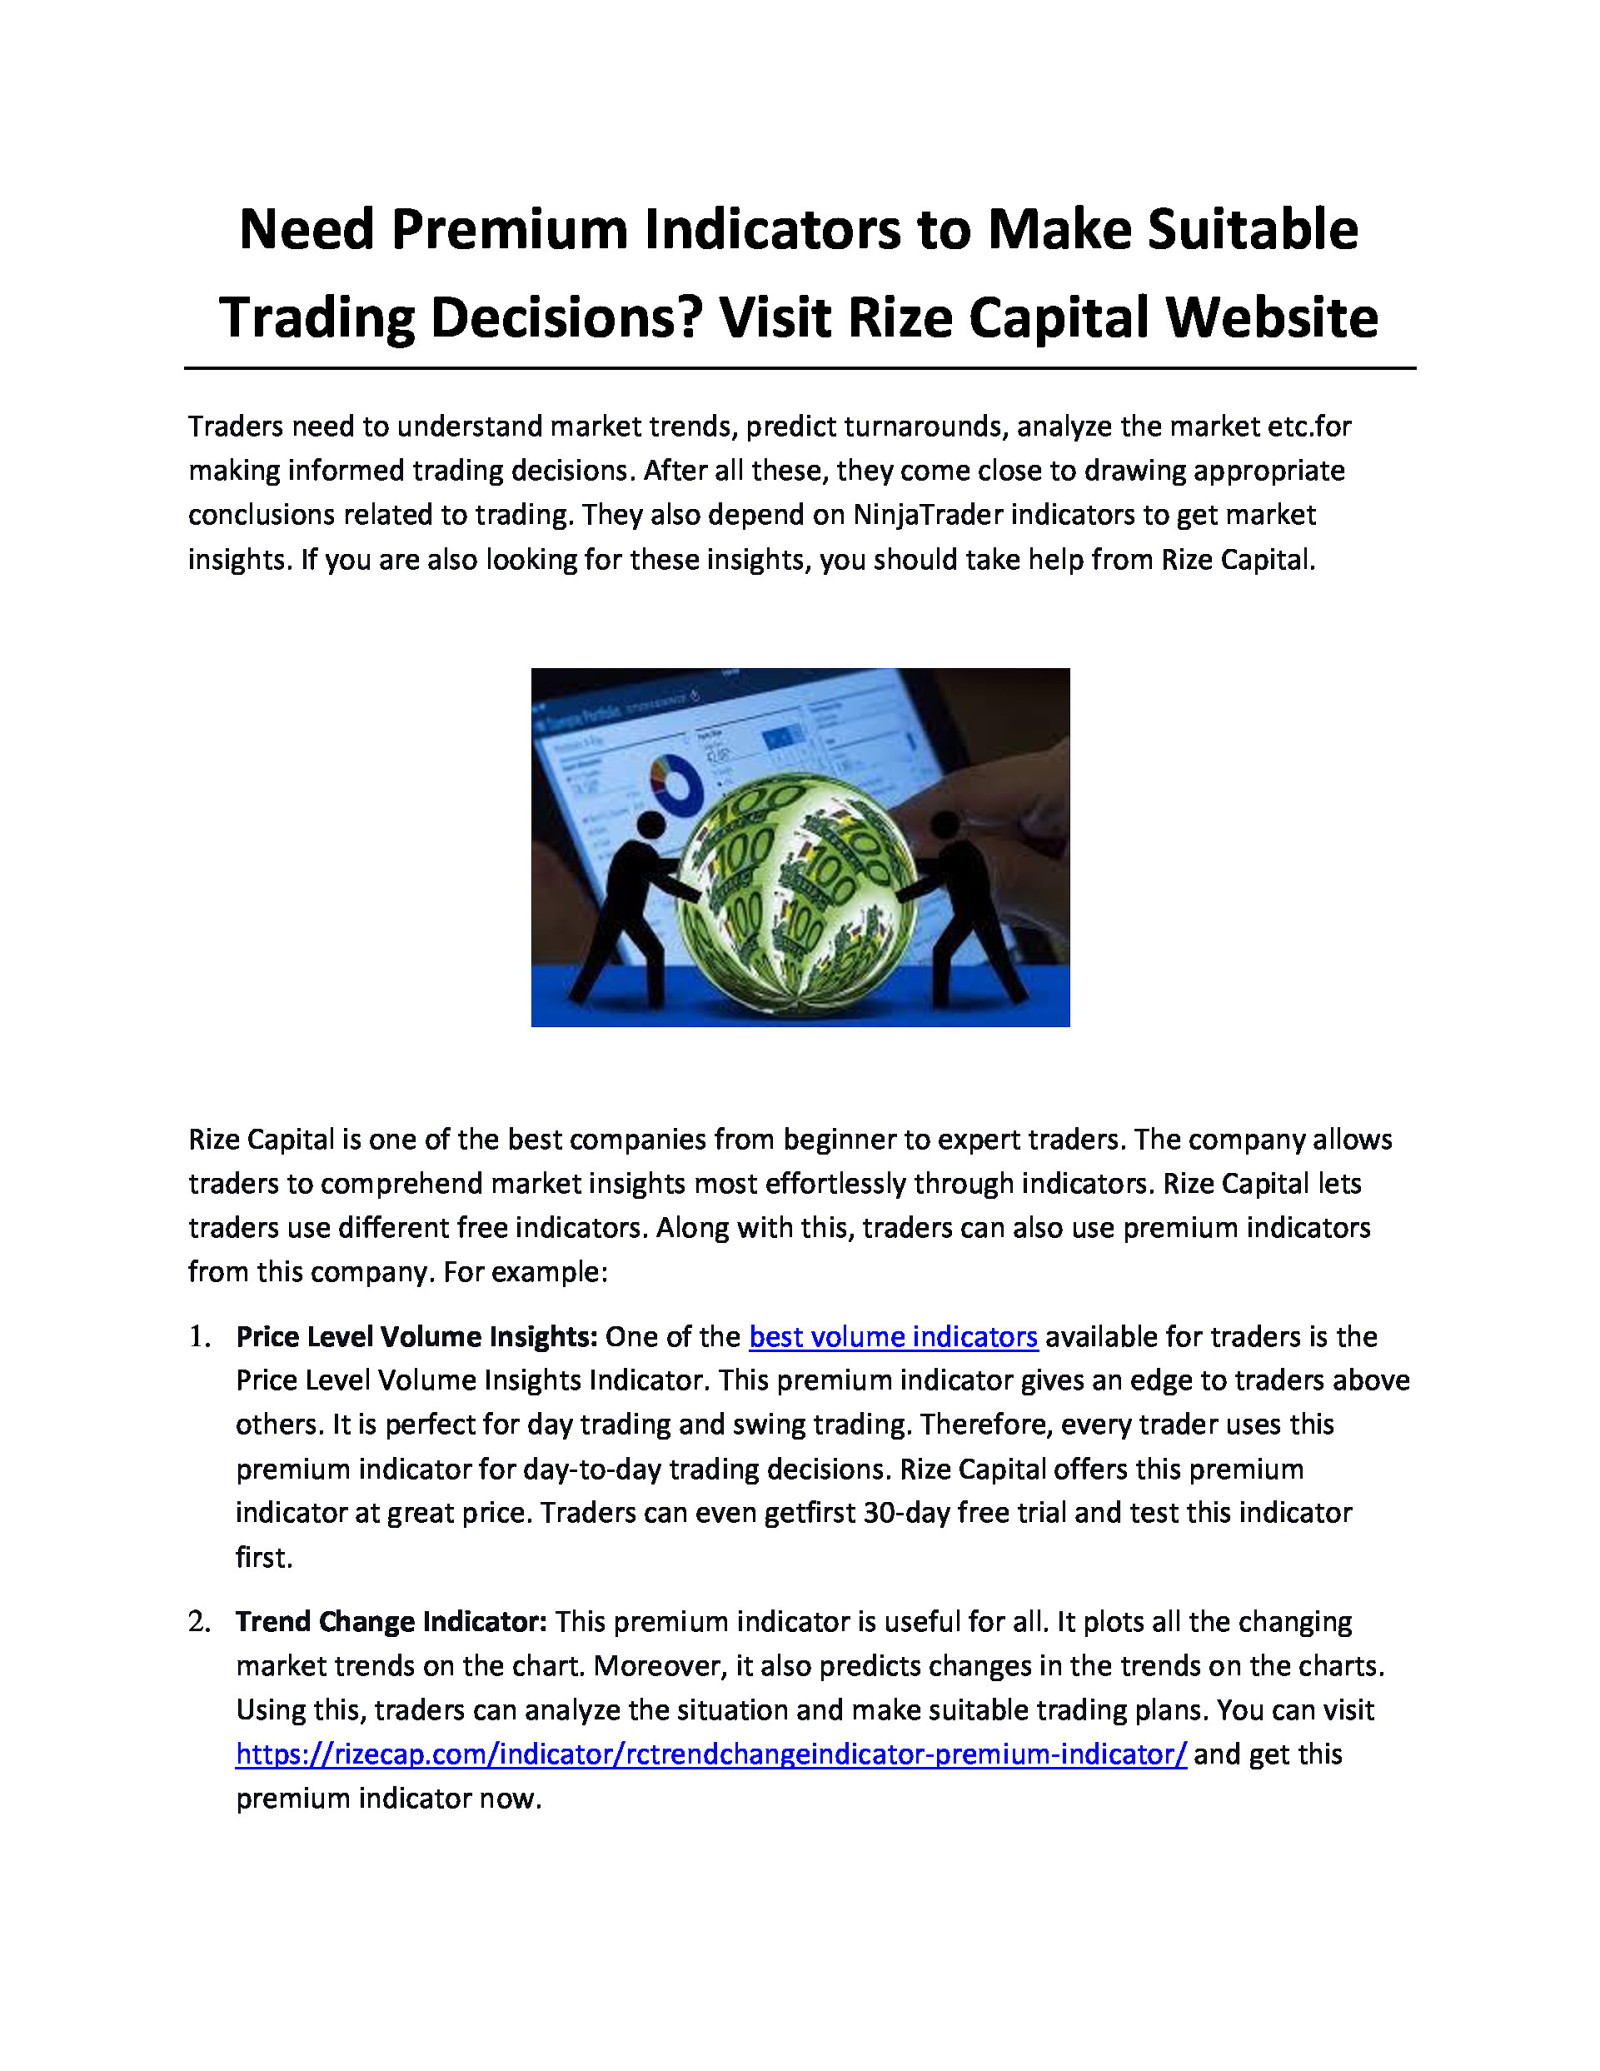 Need Premium Indicators to Make Suitable Trading Decisions? Visit Rize Capital Website